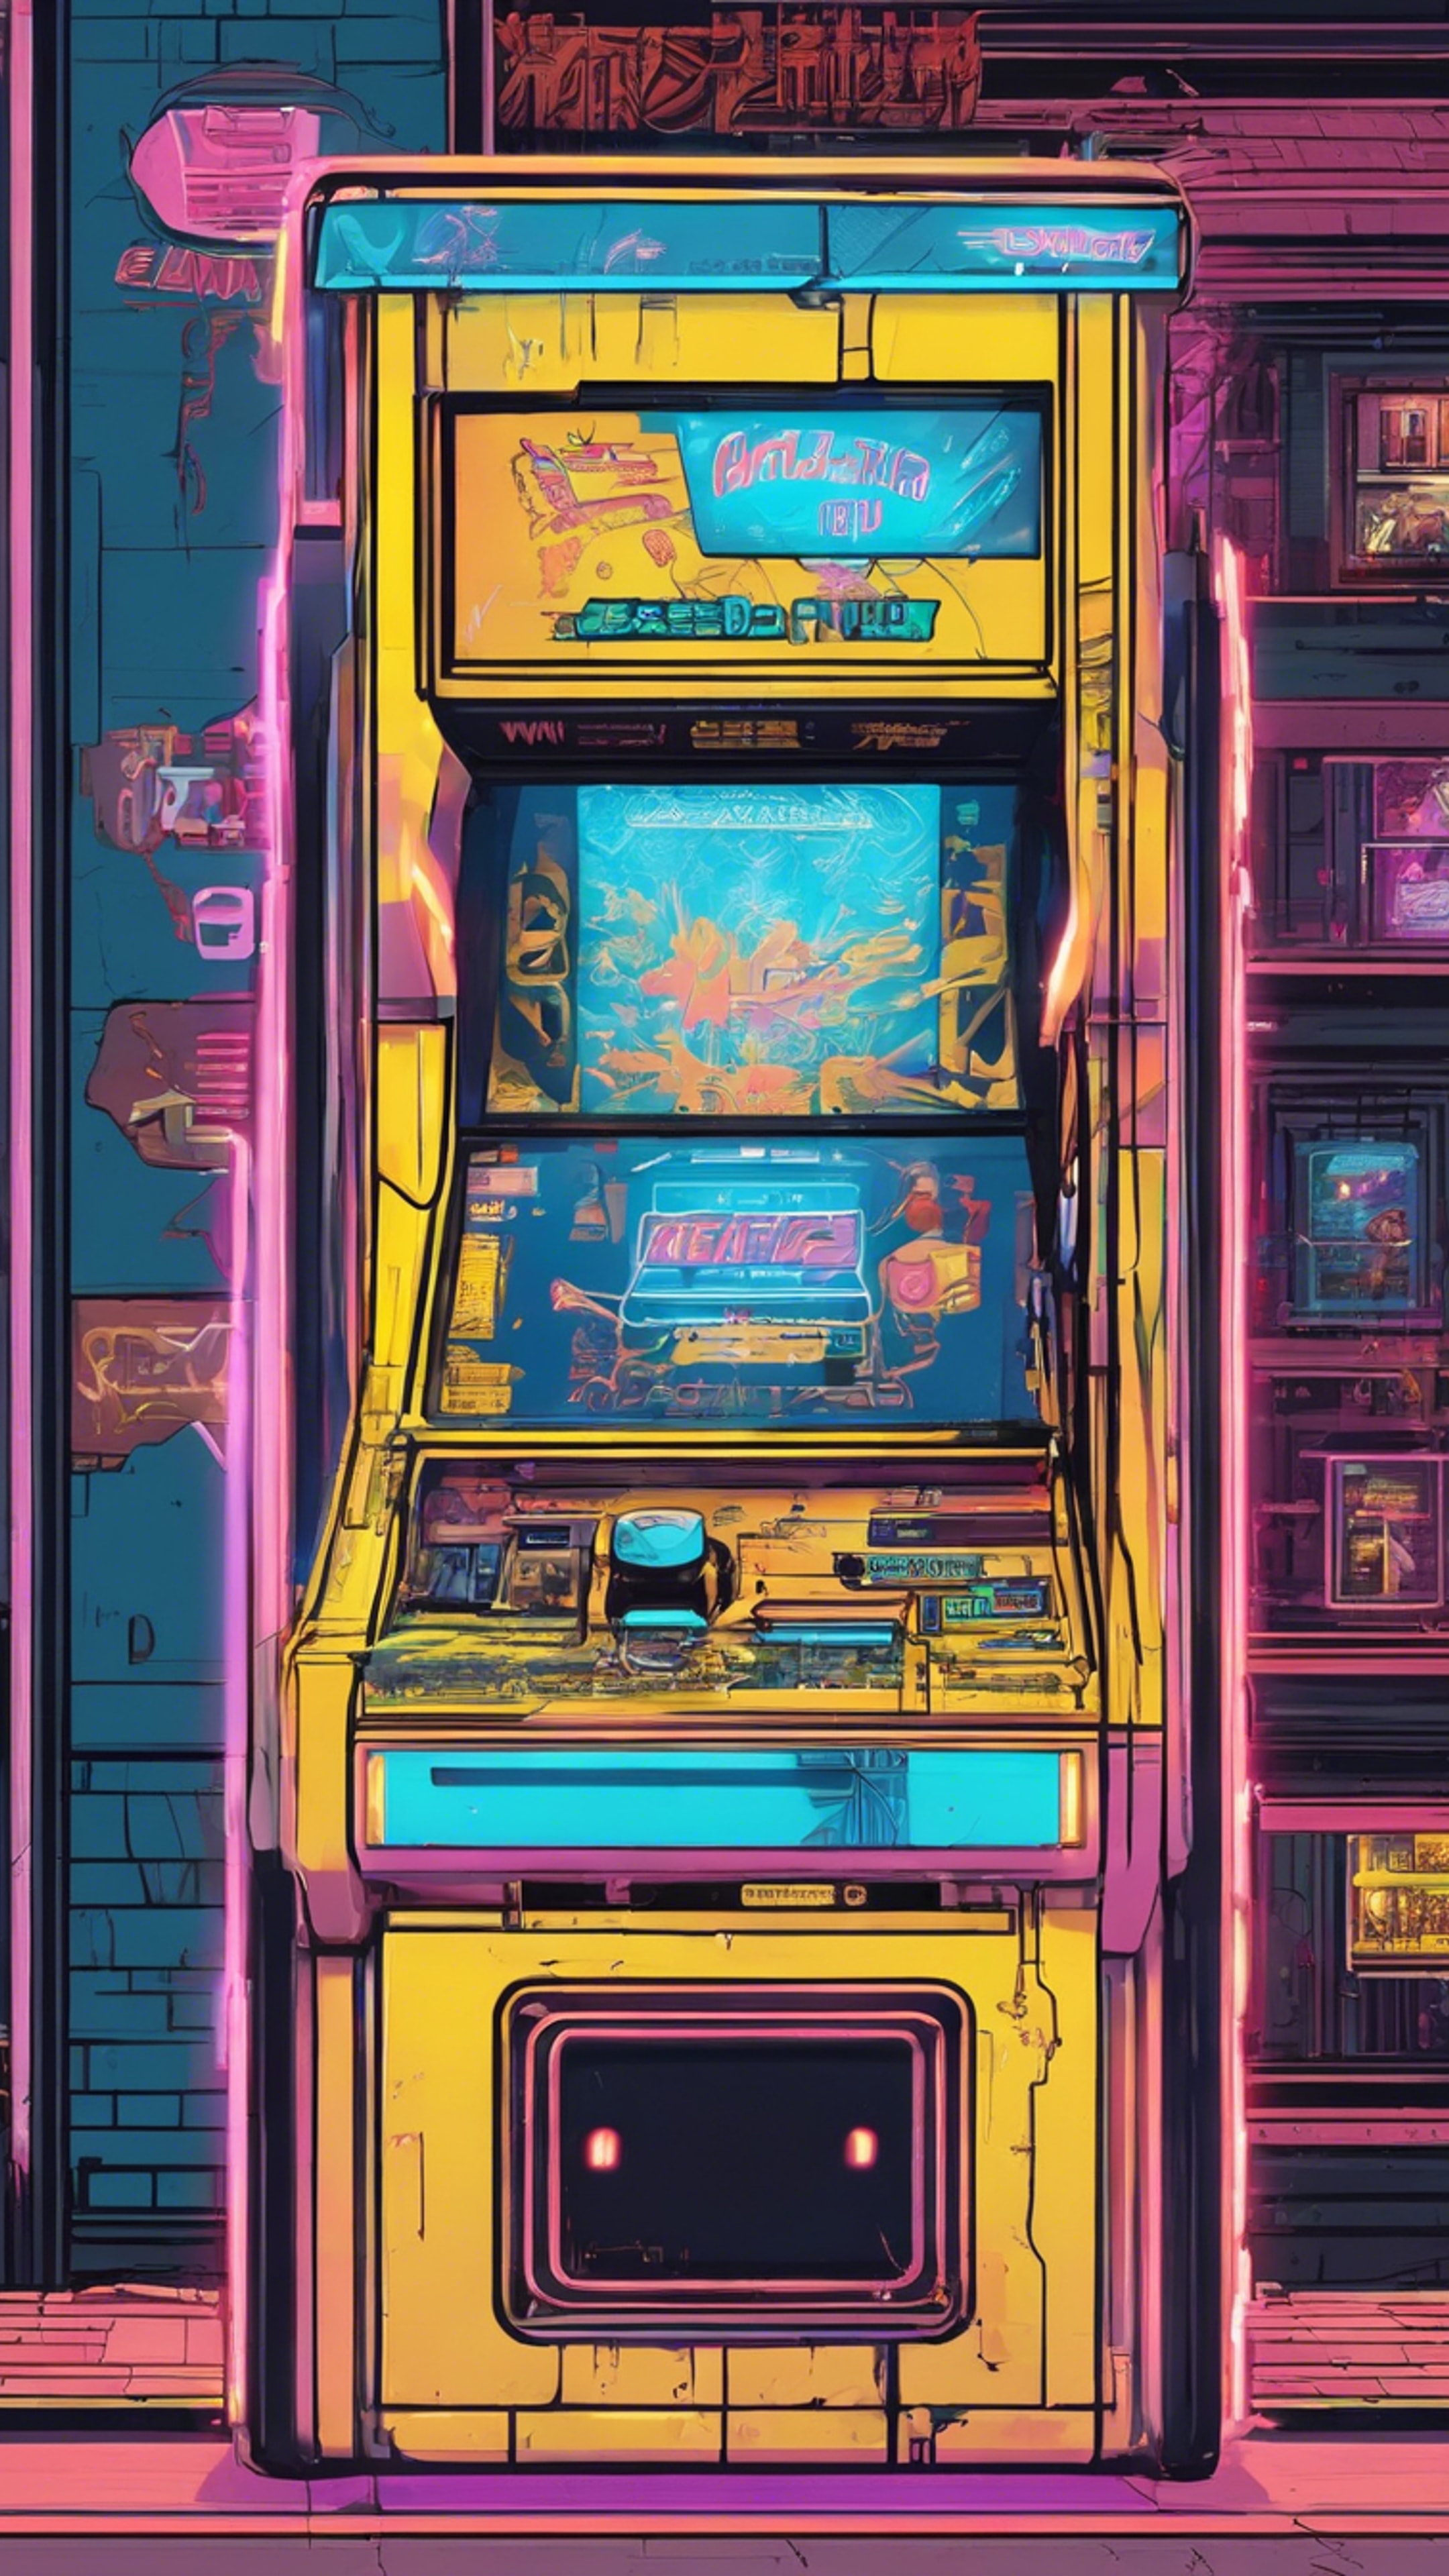 A vintage arcade machine with blue and yellow detailing, set in a retro game shop. 墙纸[7a93d221b5de45b8b20a]